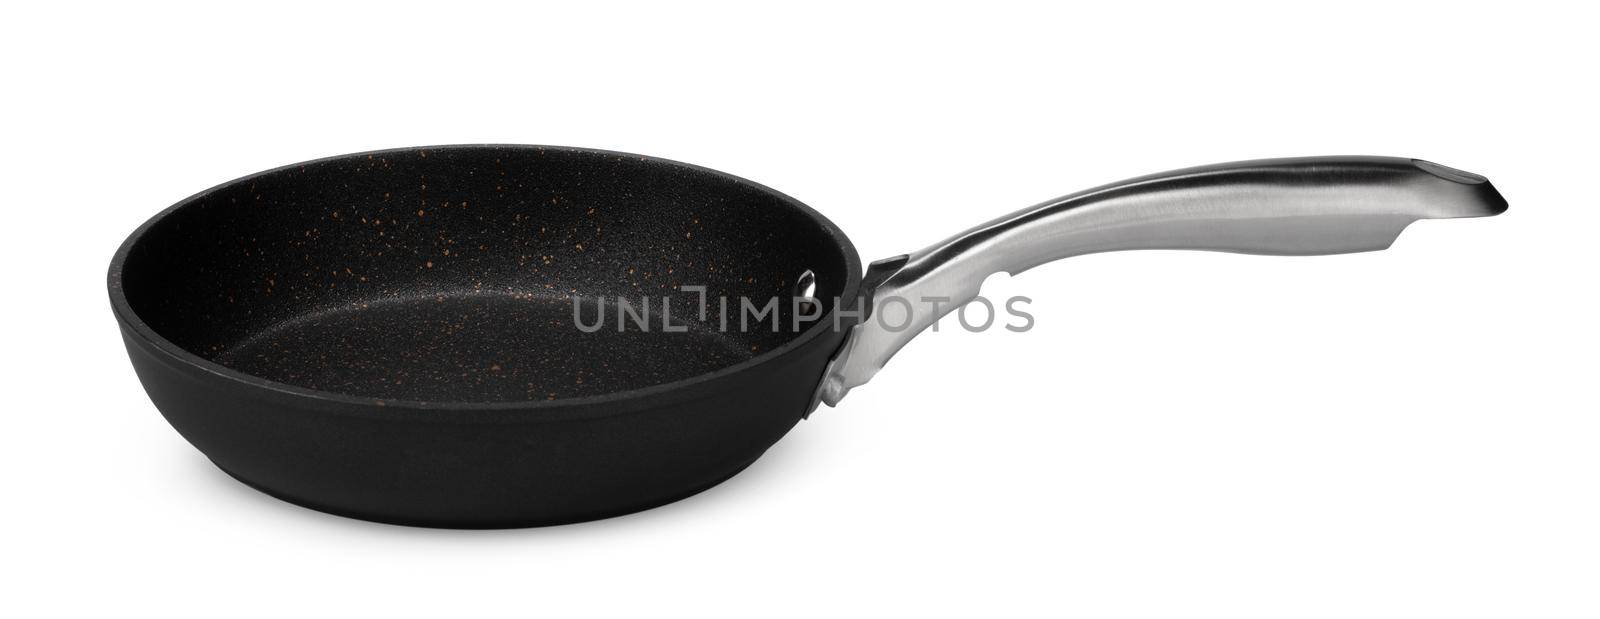 New black frying pan isolated on white background by Fabrikasimf